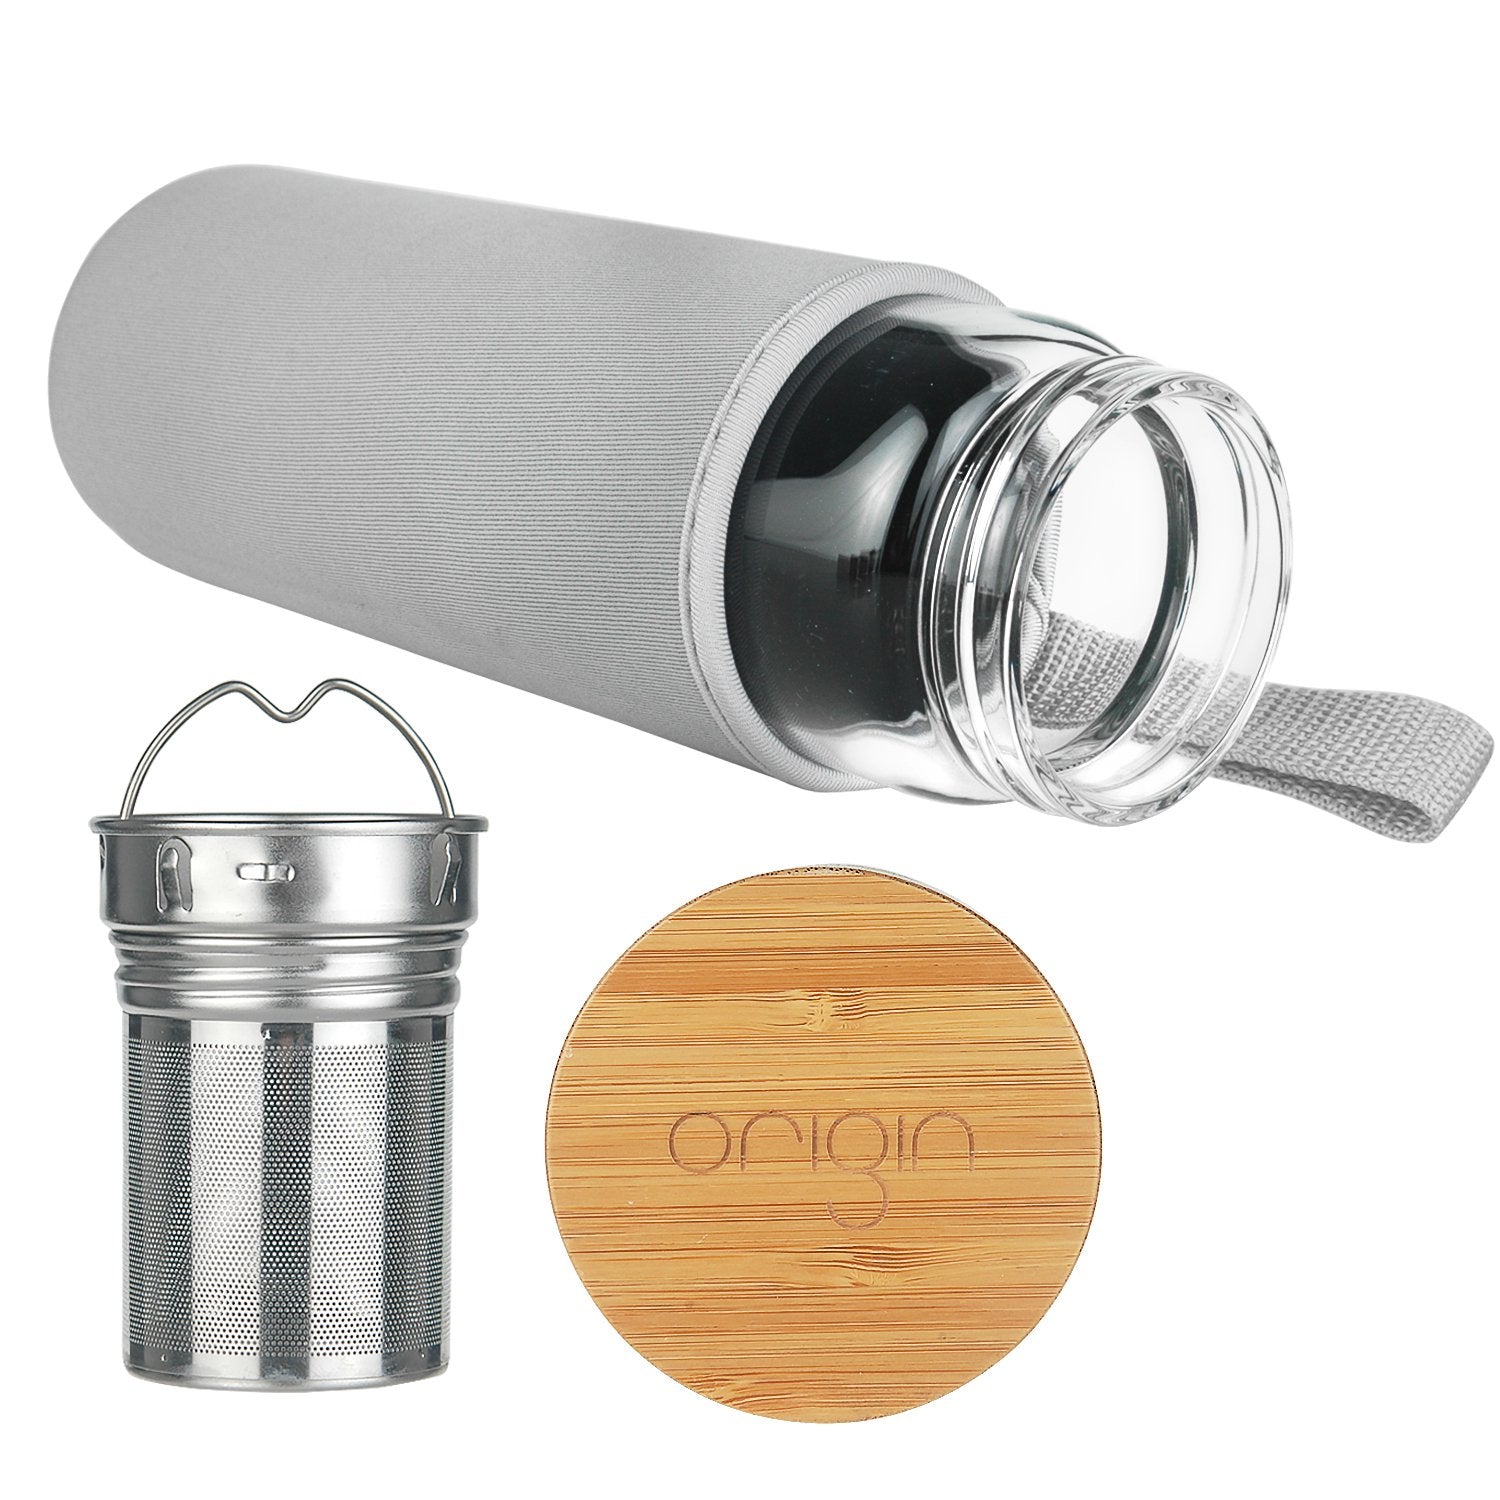 GROSCHE Glass Water / Tea / Coffee Travel Infusion Bottle — Gray